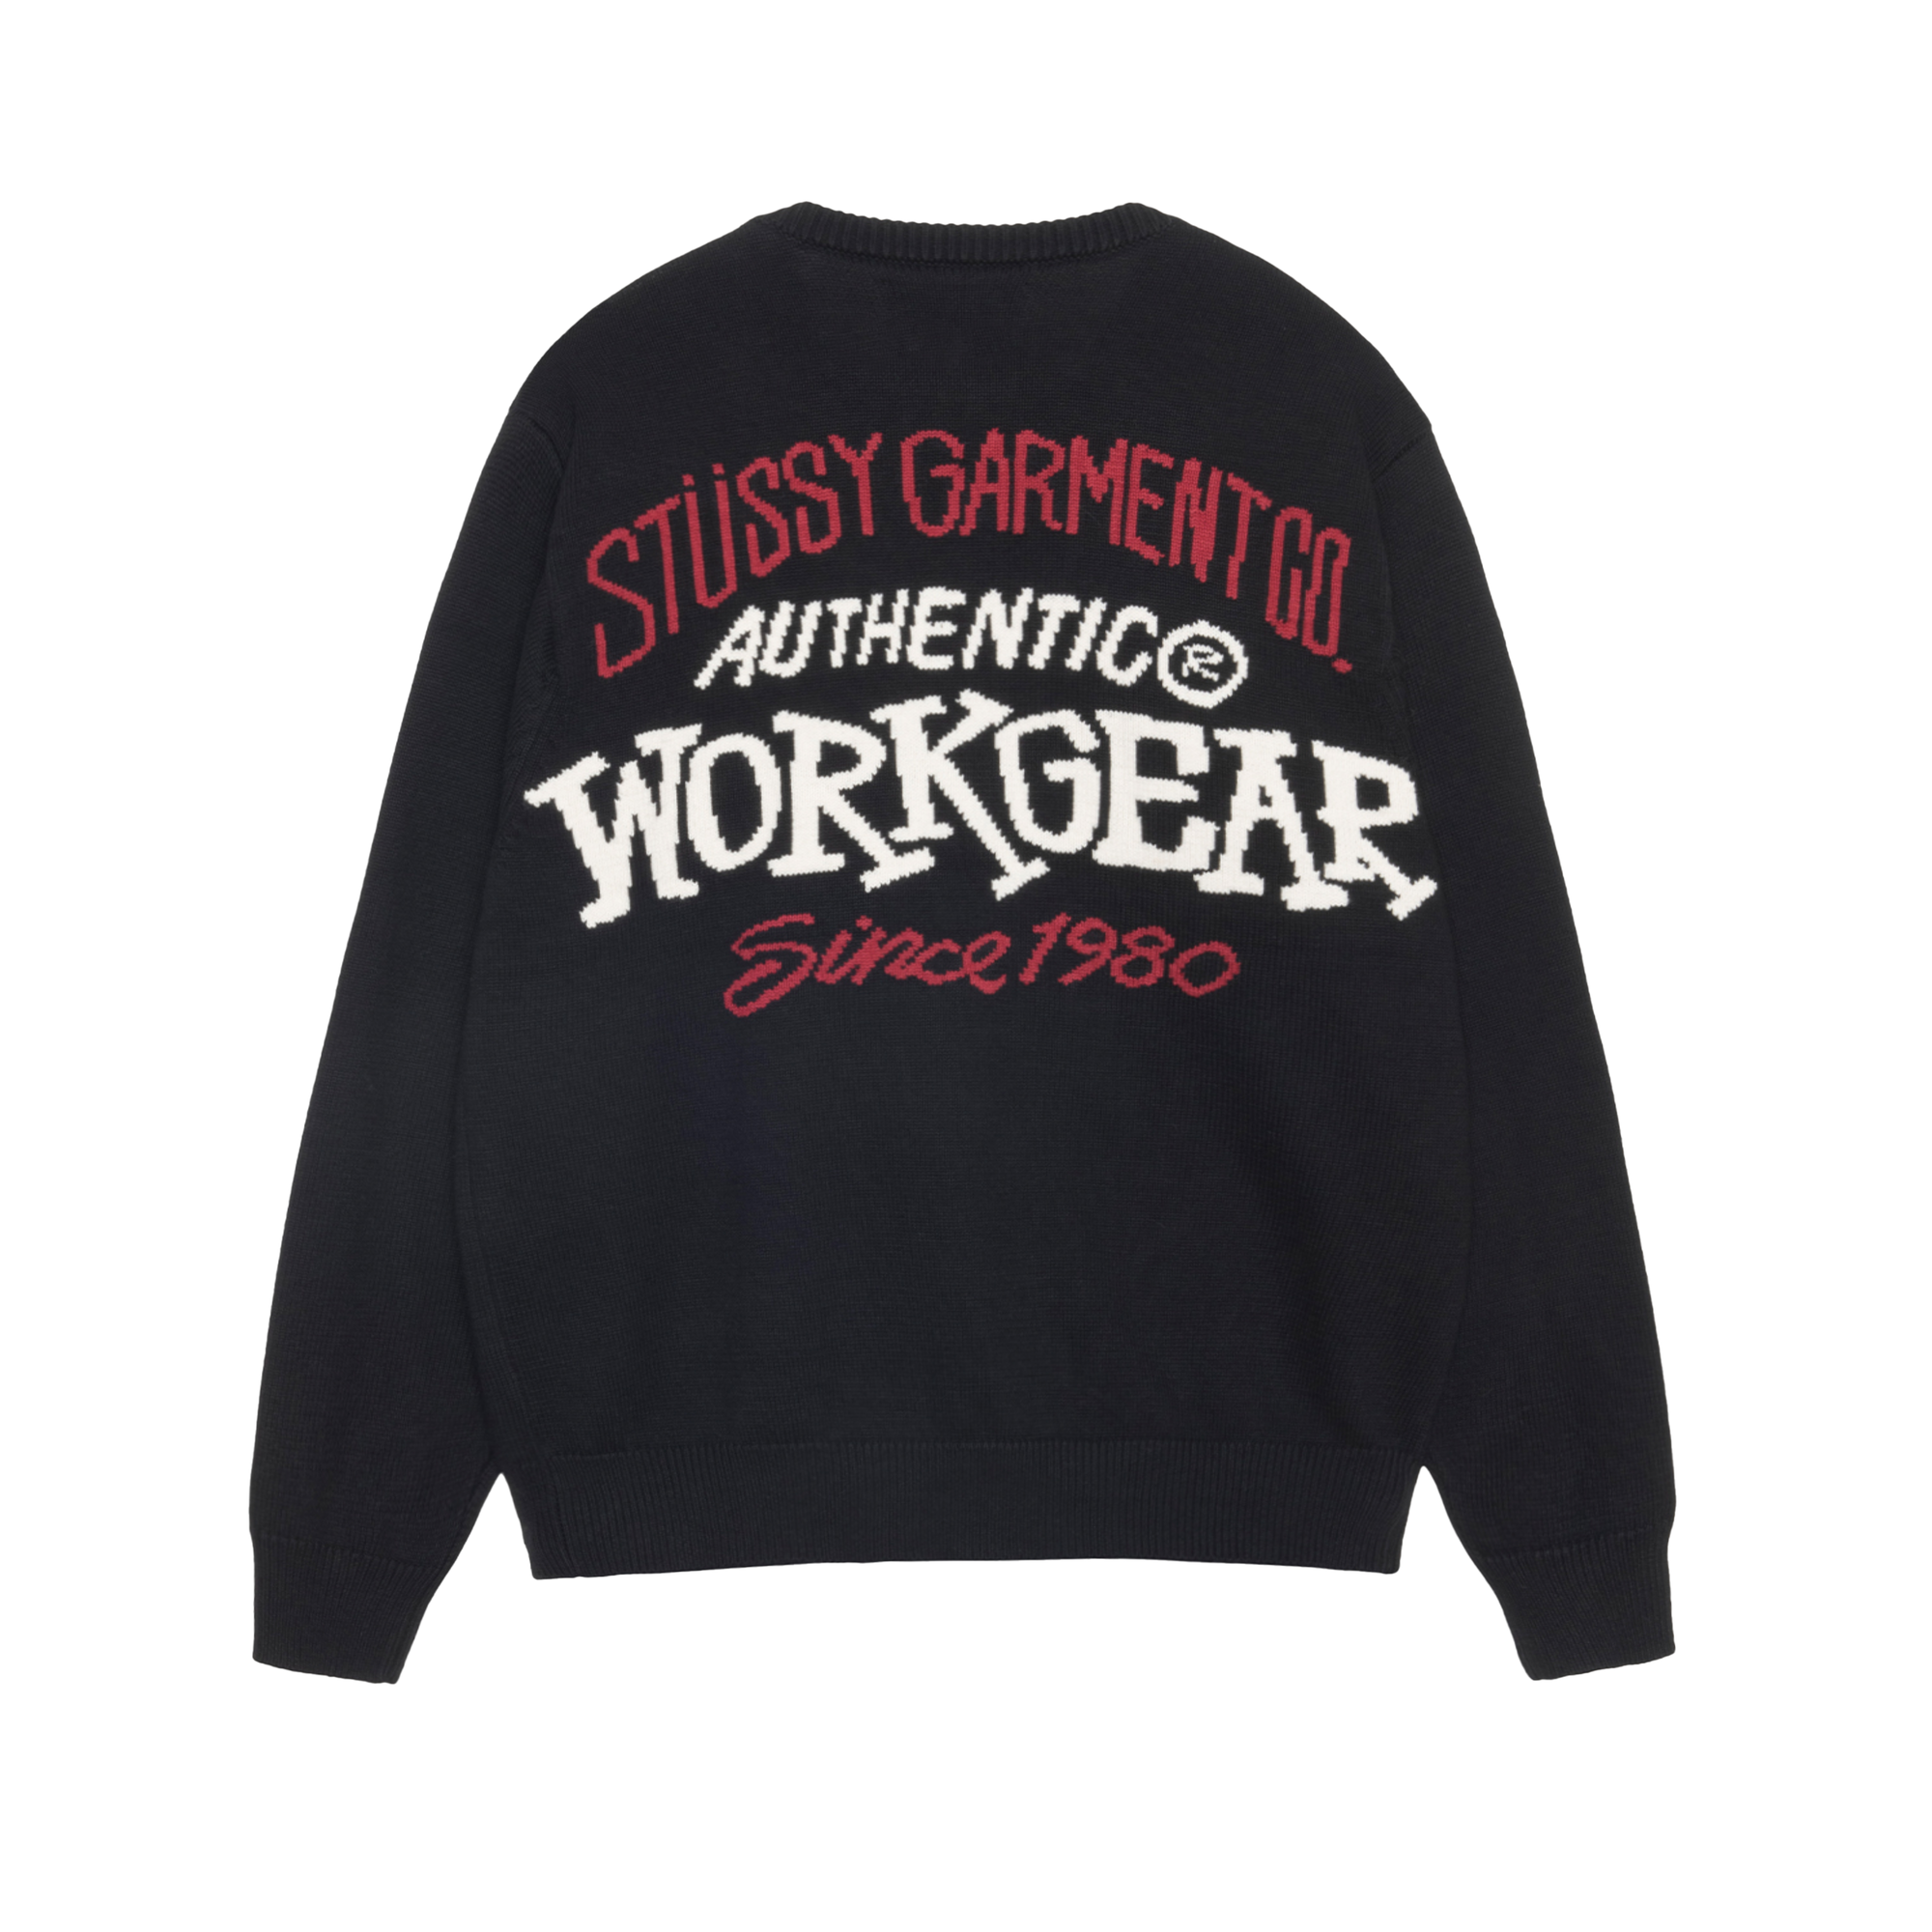 STUSSY Authentic Workgear Sweater